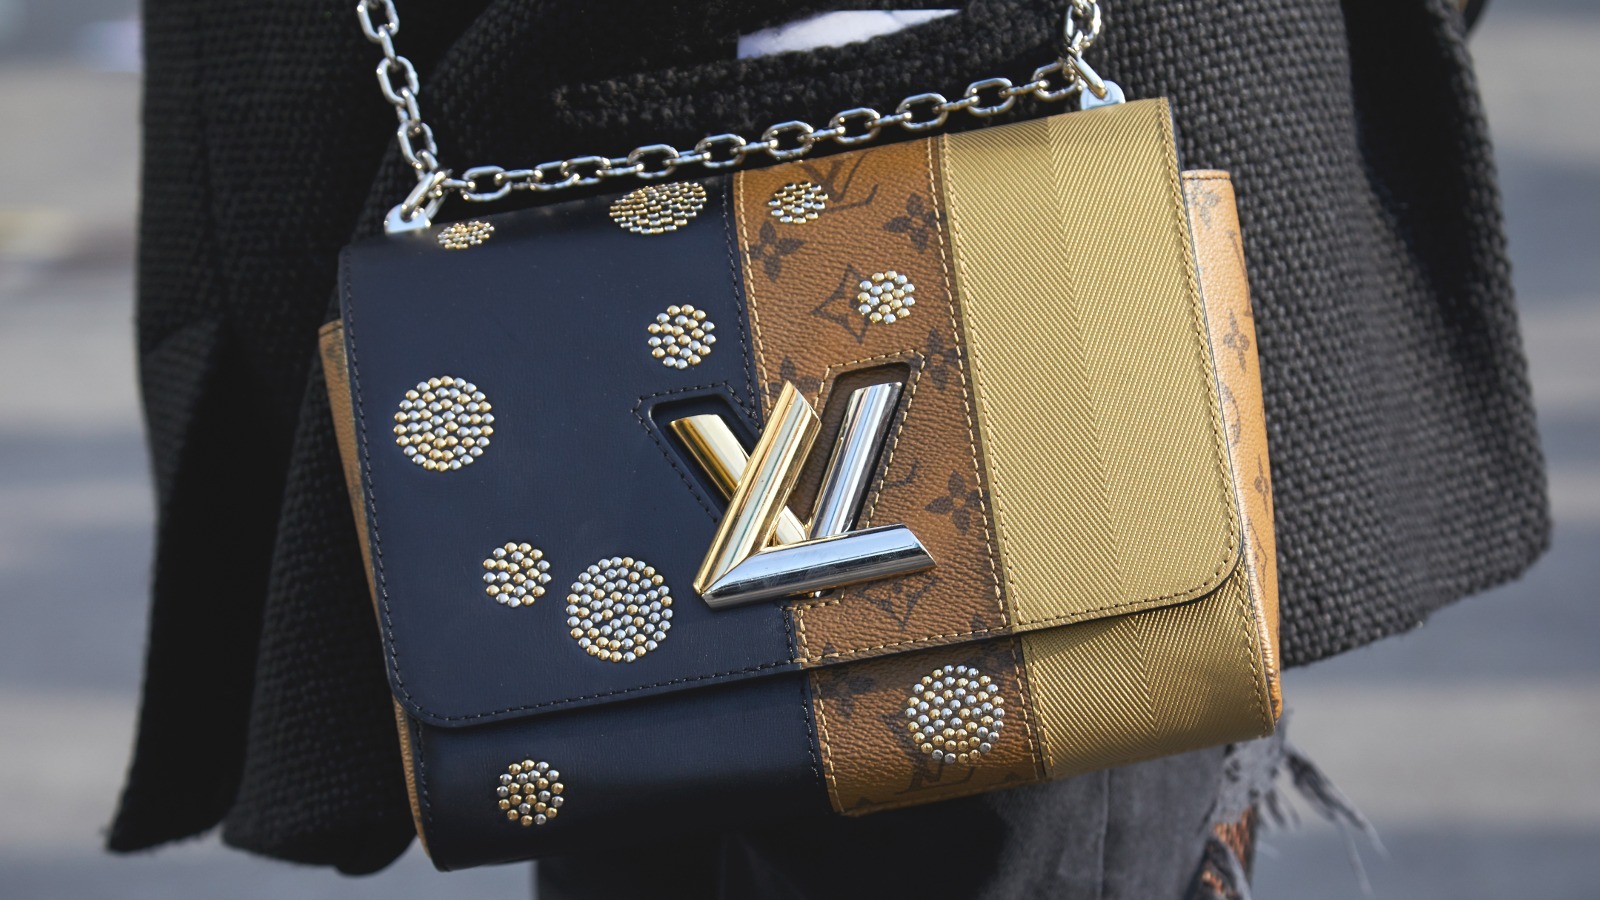 3 Mistakes To Avoid When Buying Used Louis Vuitton Handbags